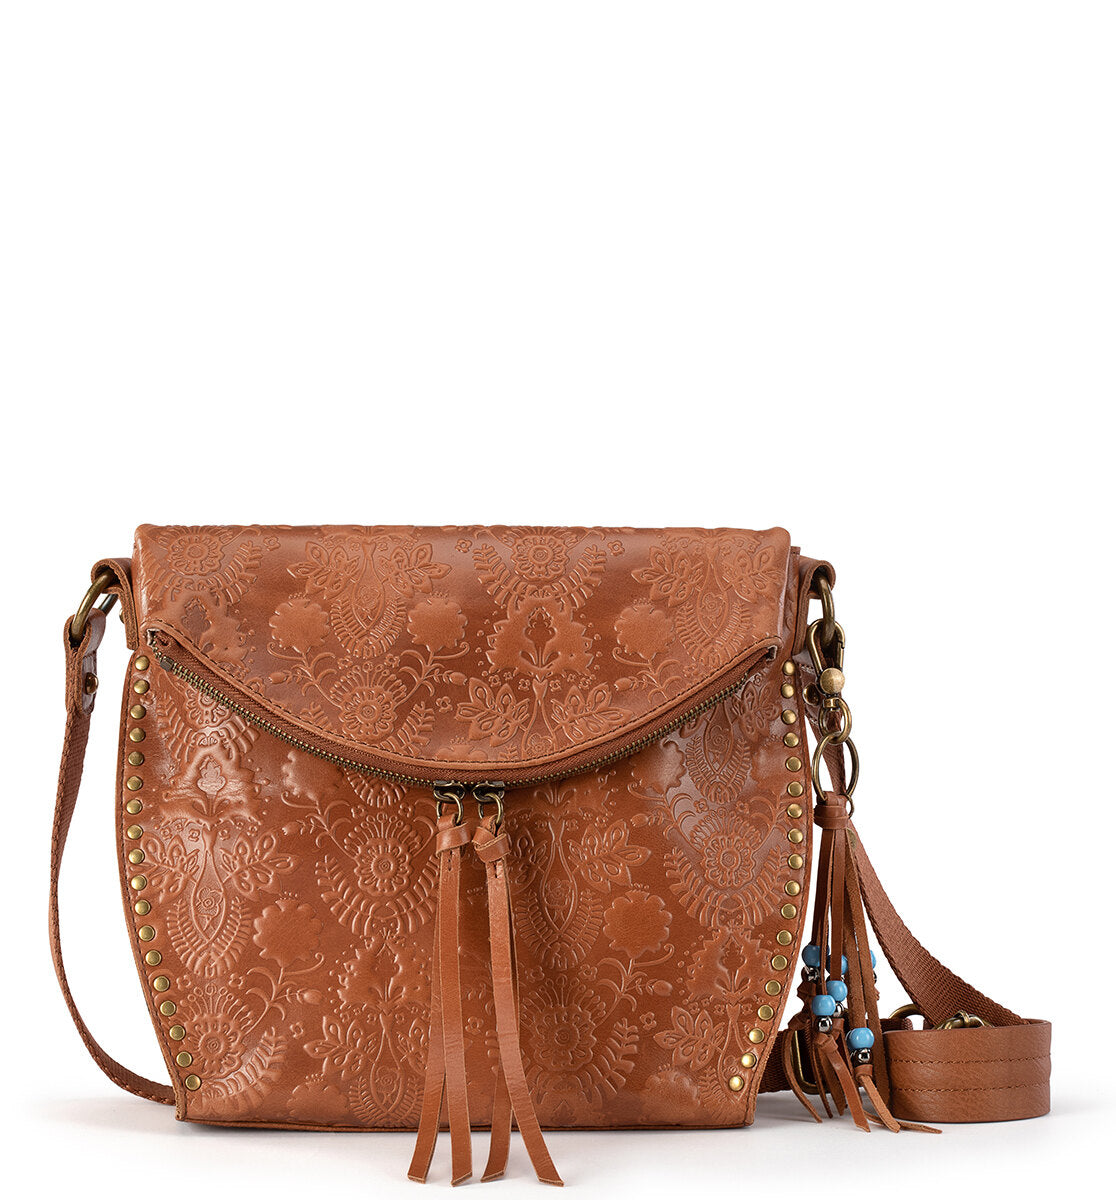 These Stylish Summer Handbags Are On Sale Right Now - Forbes Vetted